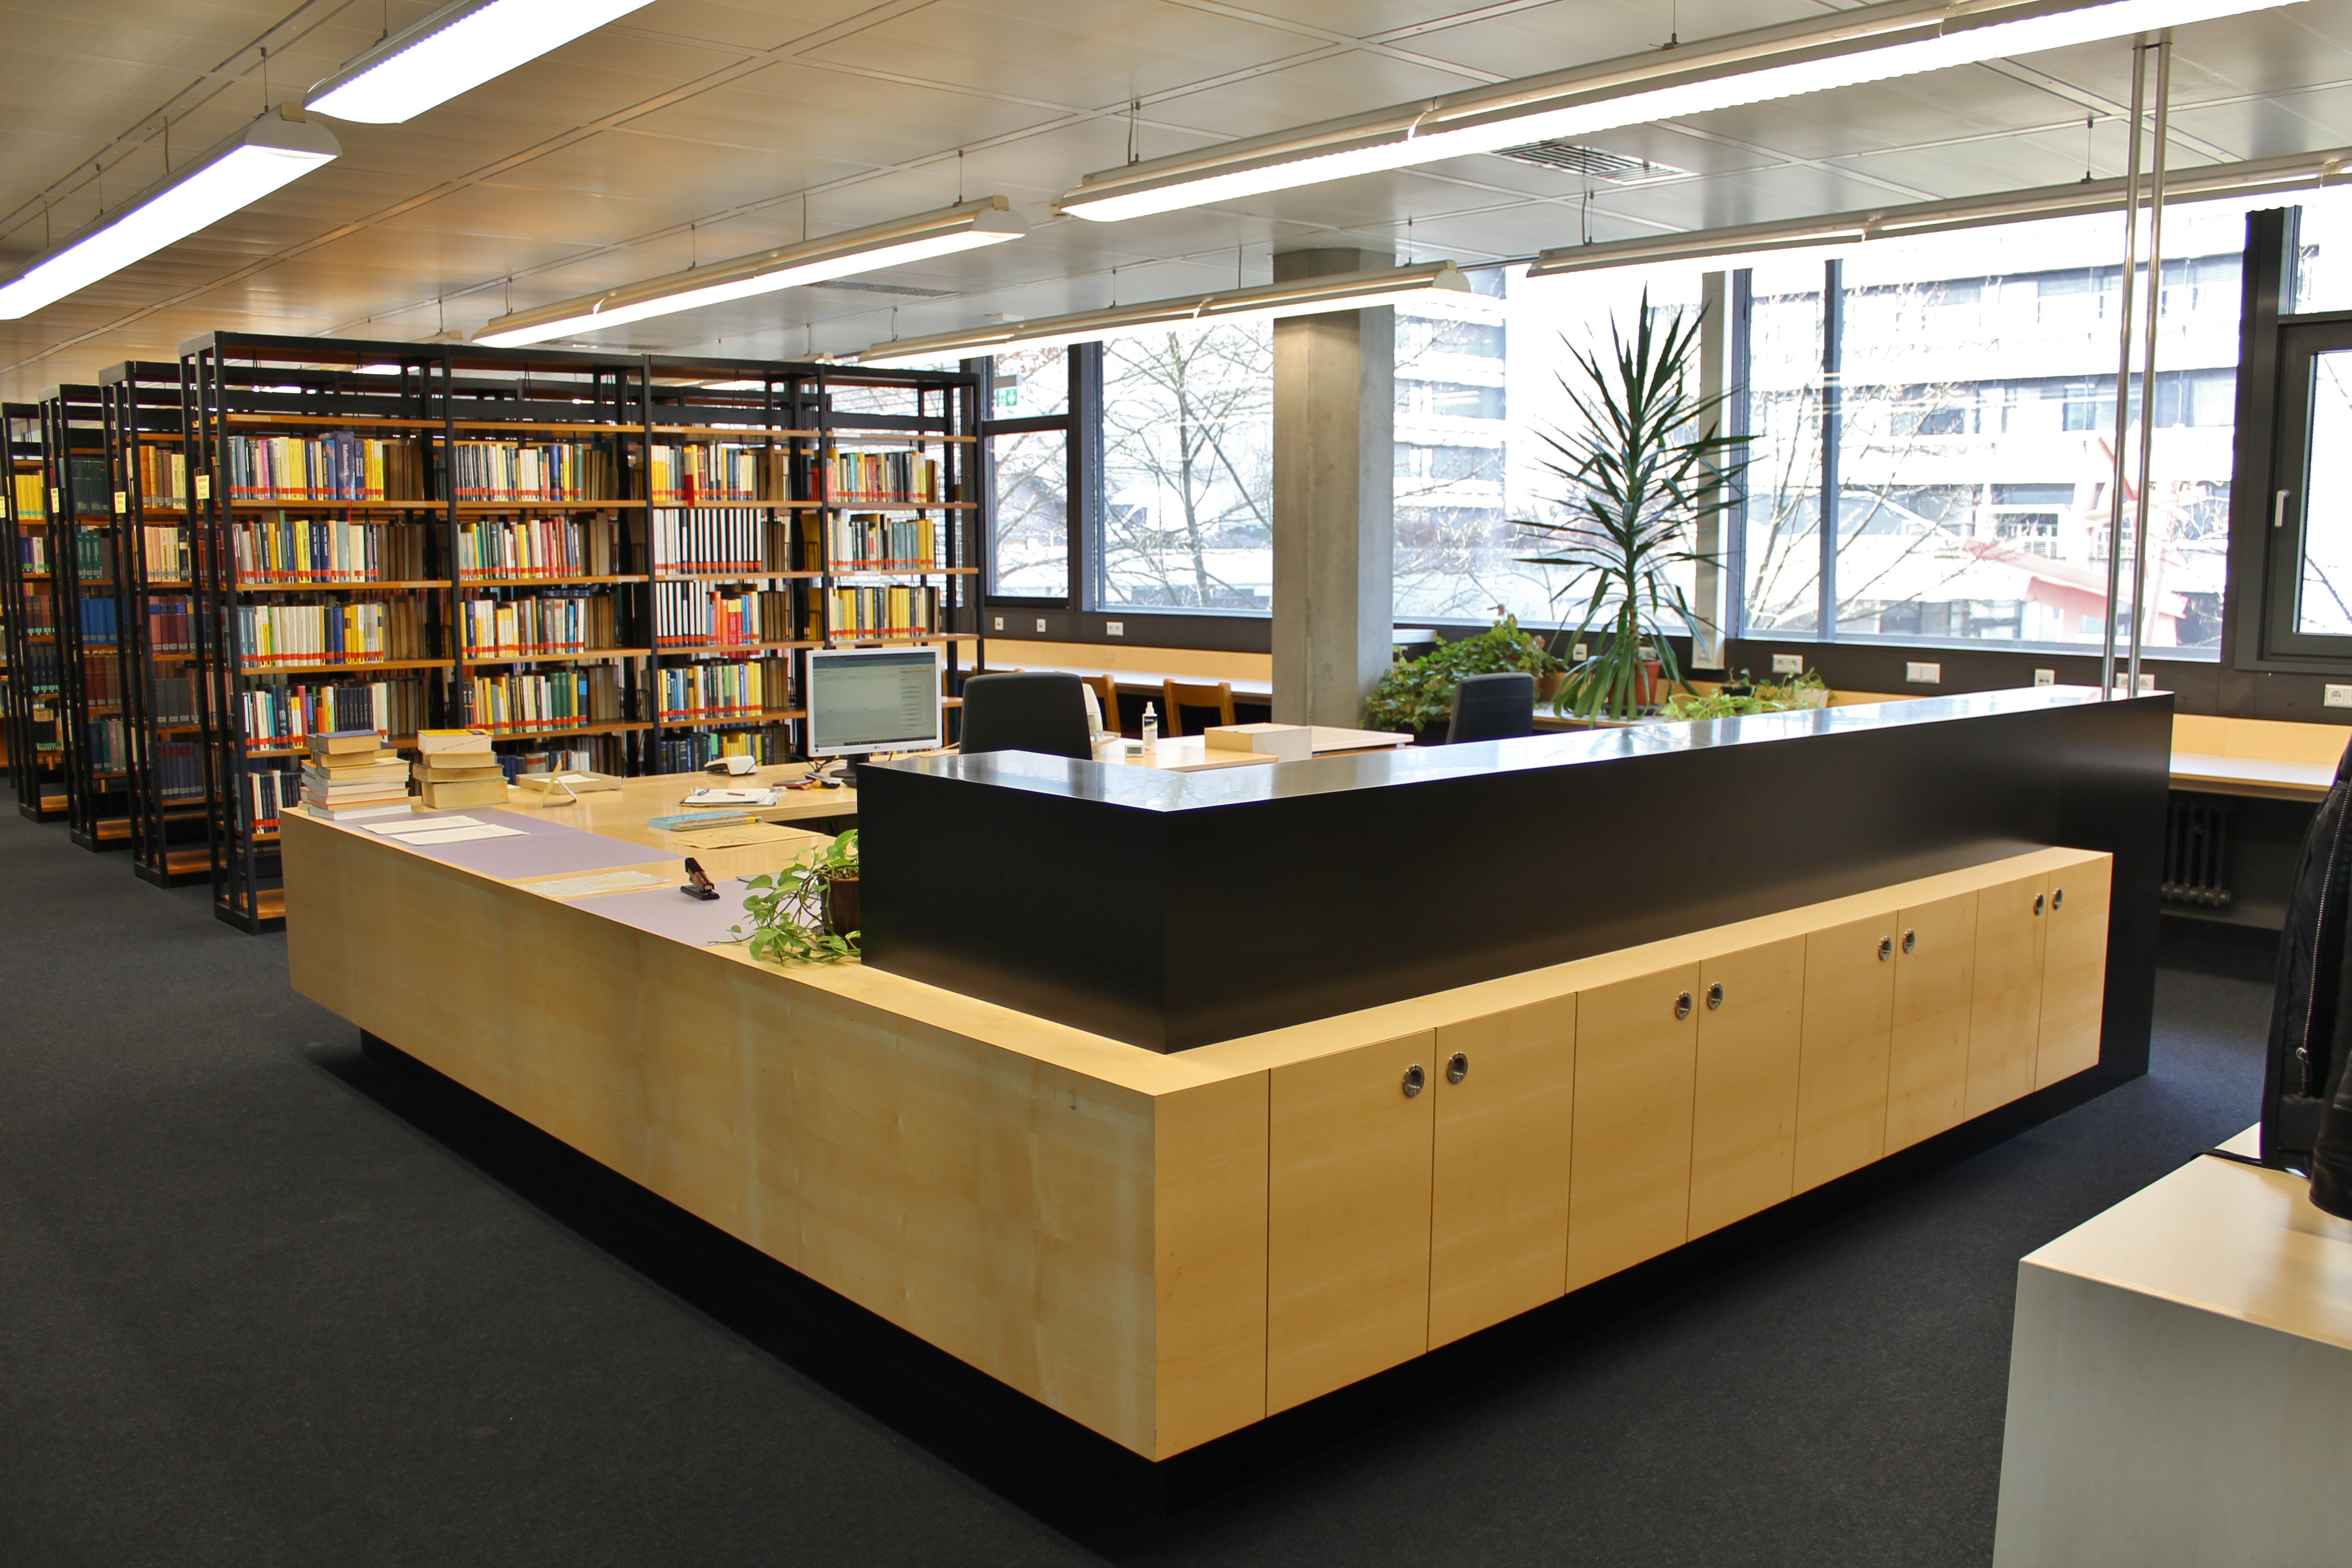 View of the check-out desk of the Mathematics and Physics Library